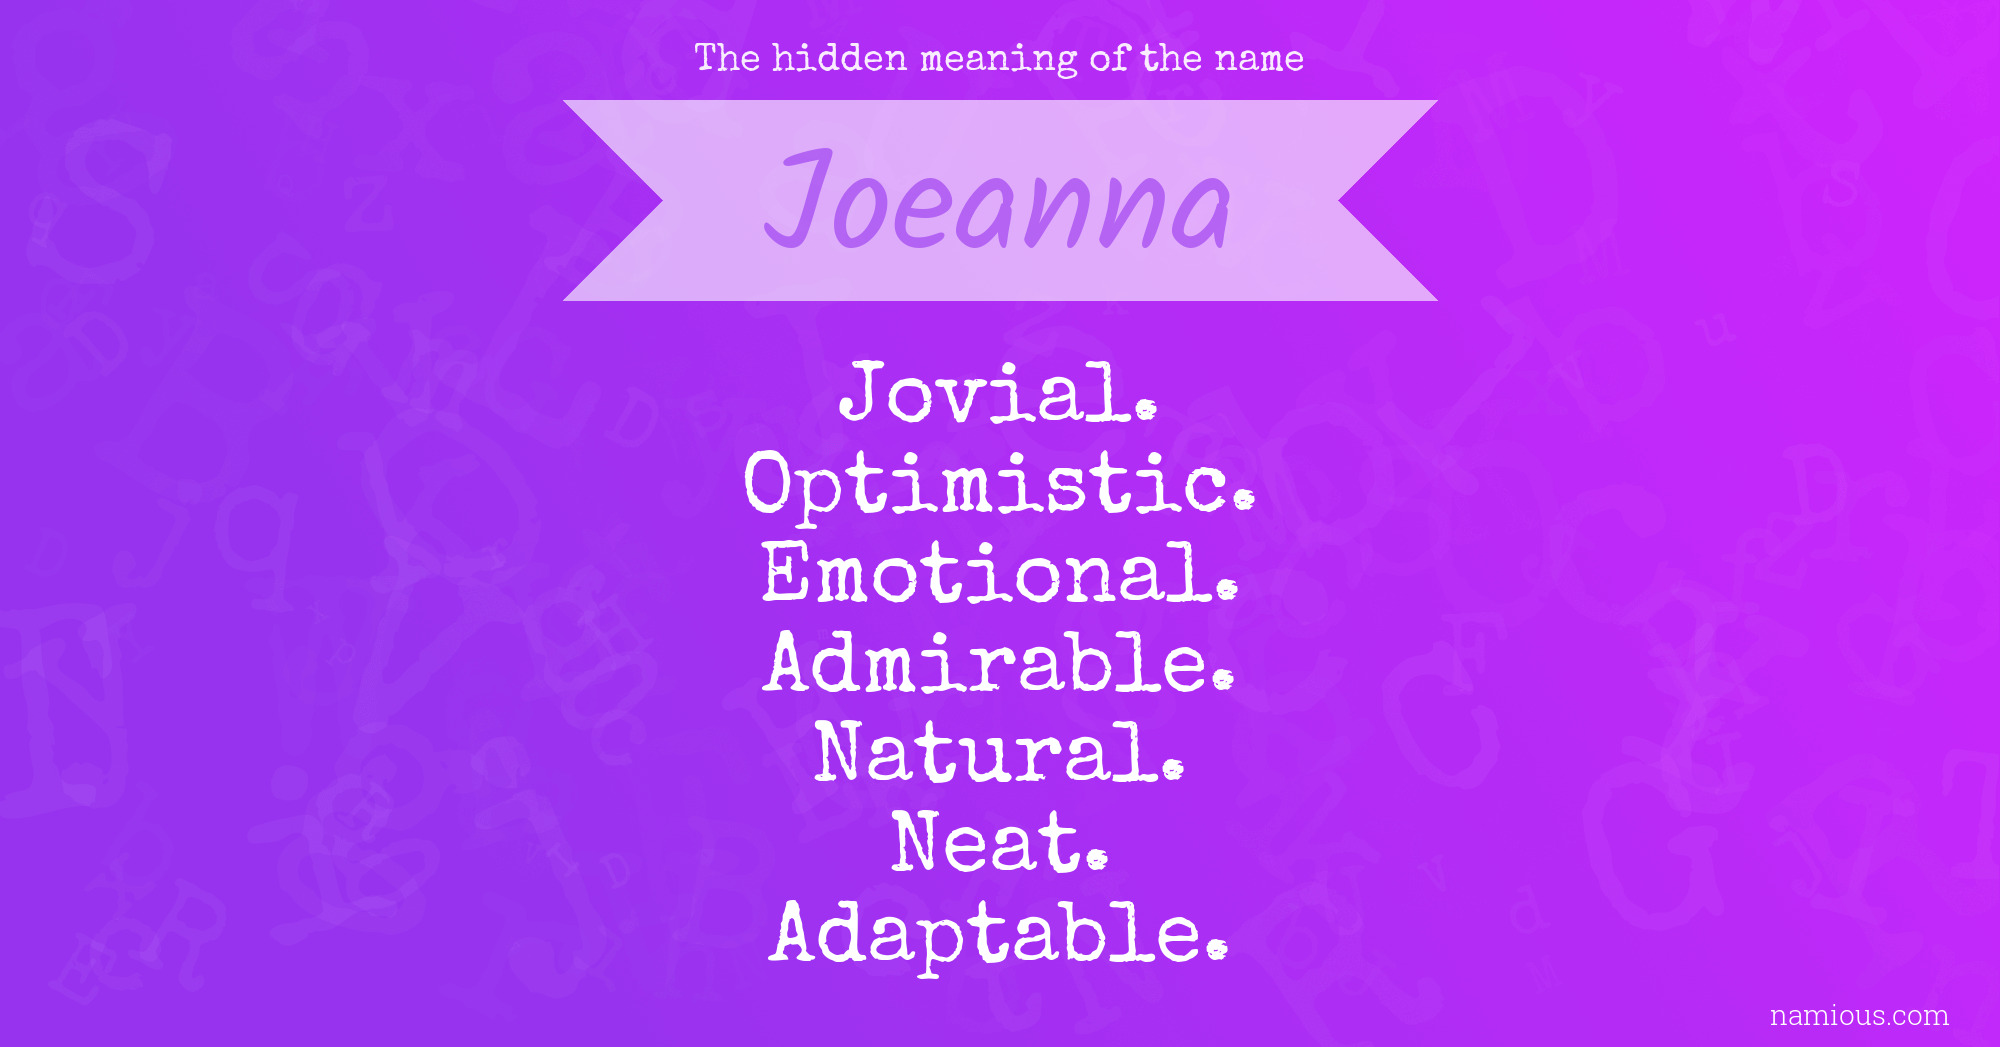 The hidden meaning of the name Joeanna